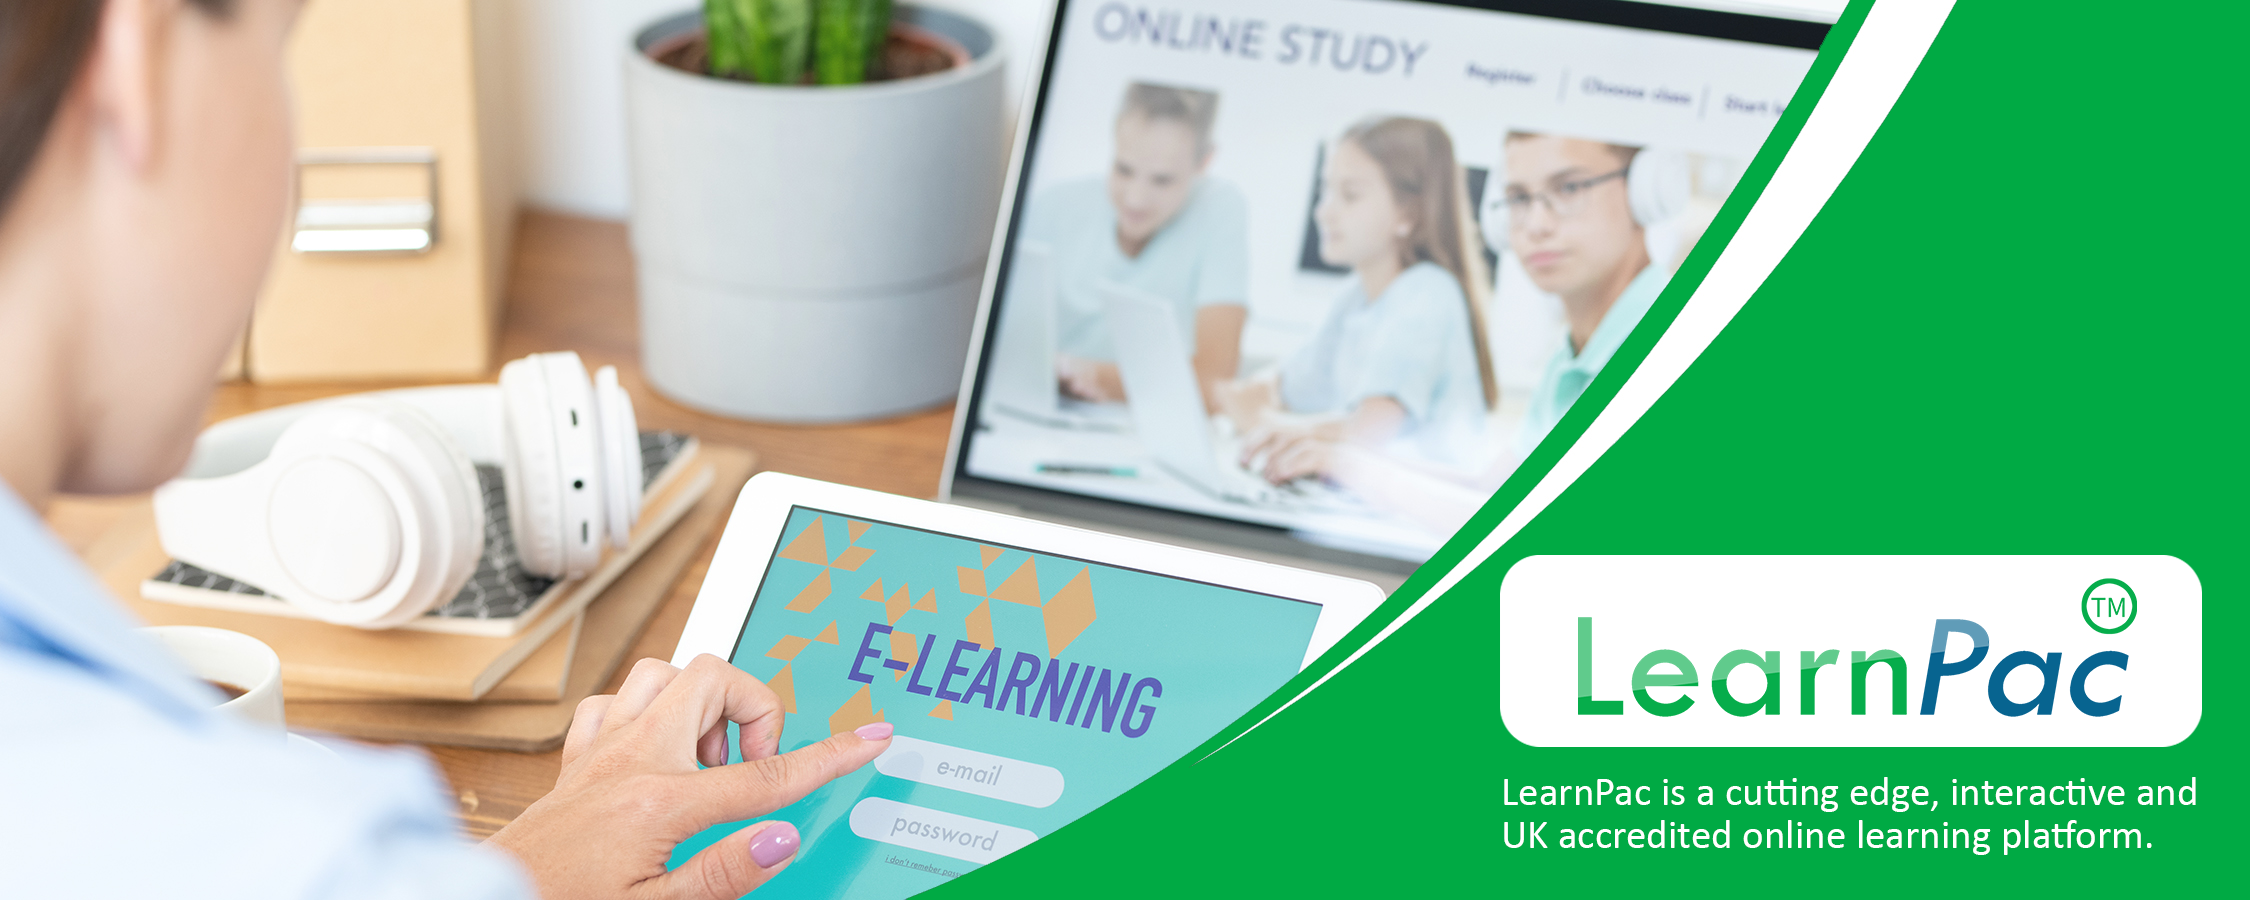 CSTF Non-Clinical Safeguarding Children - Online Training Courses - LearnPac Systems UK -